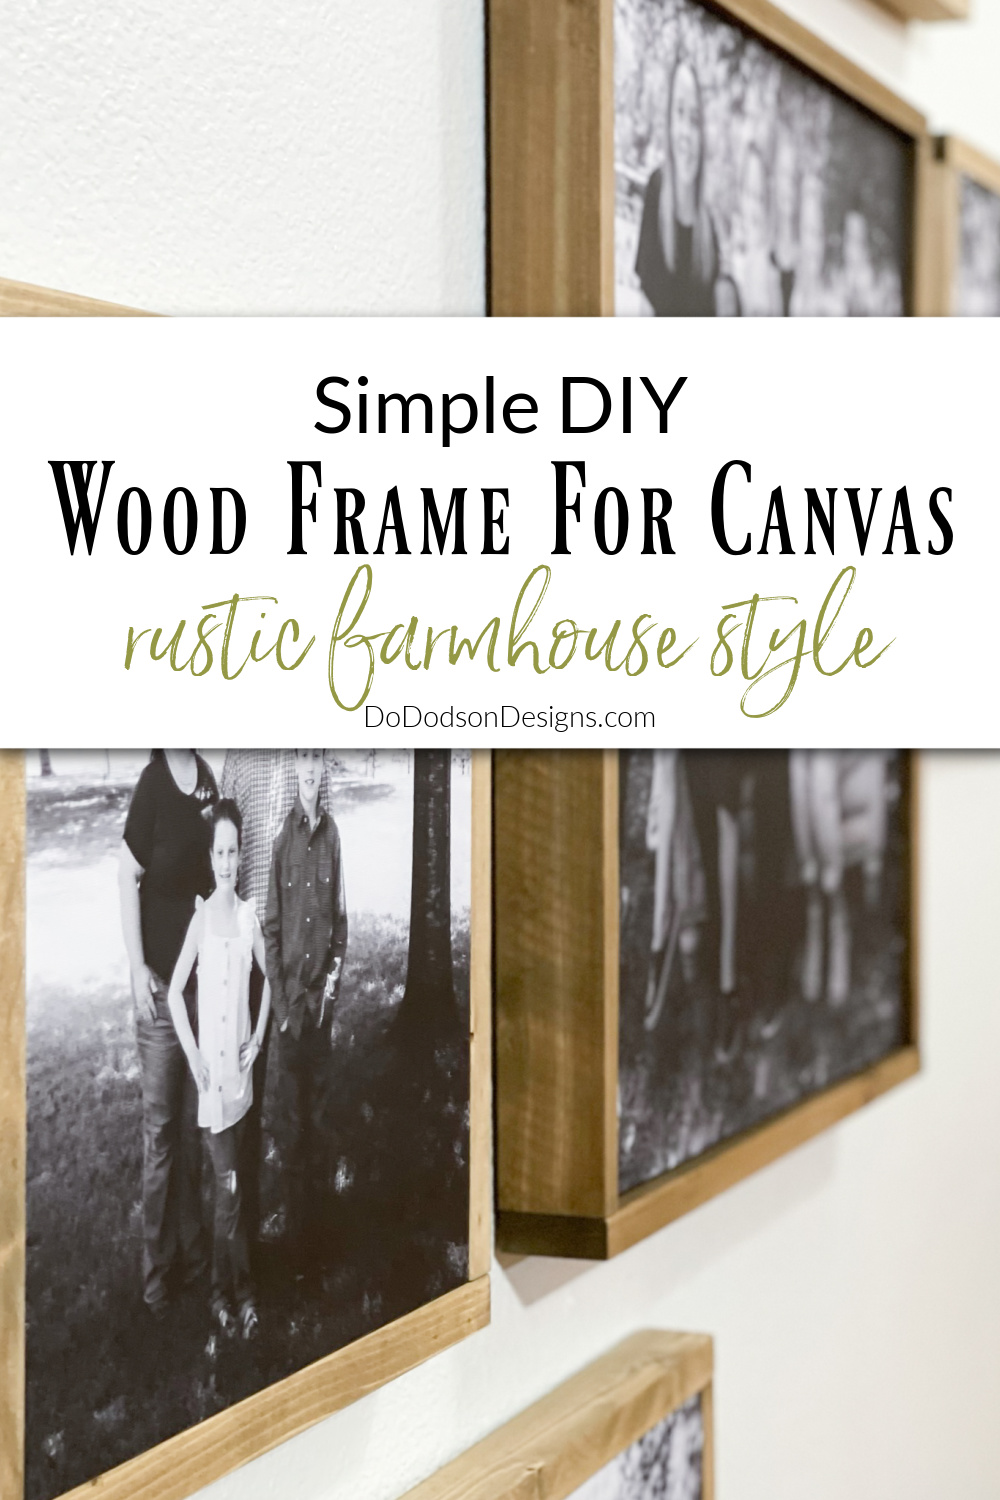 Simple DIY Wood Frame For Canvas